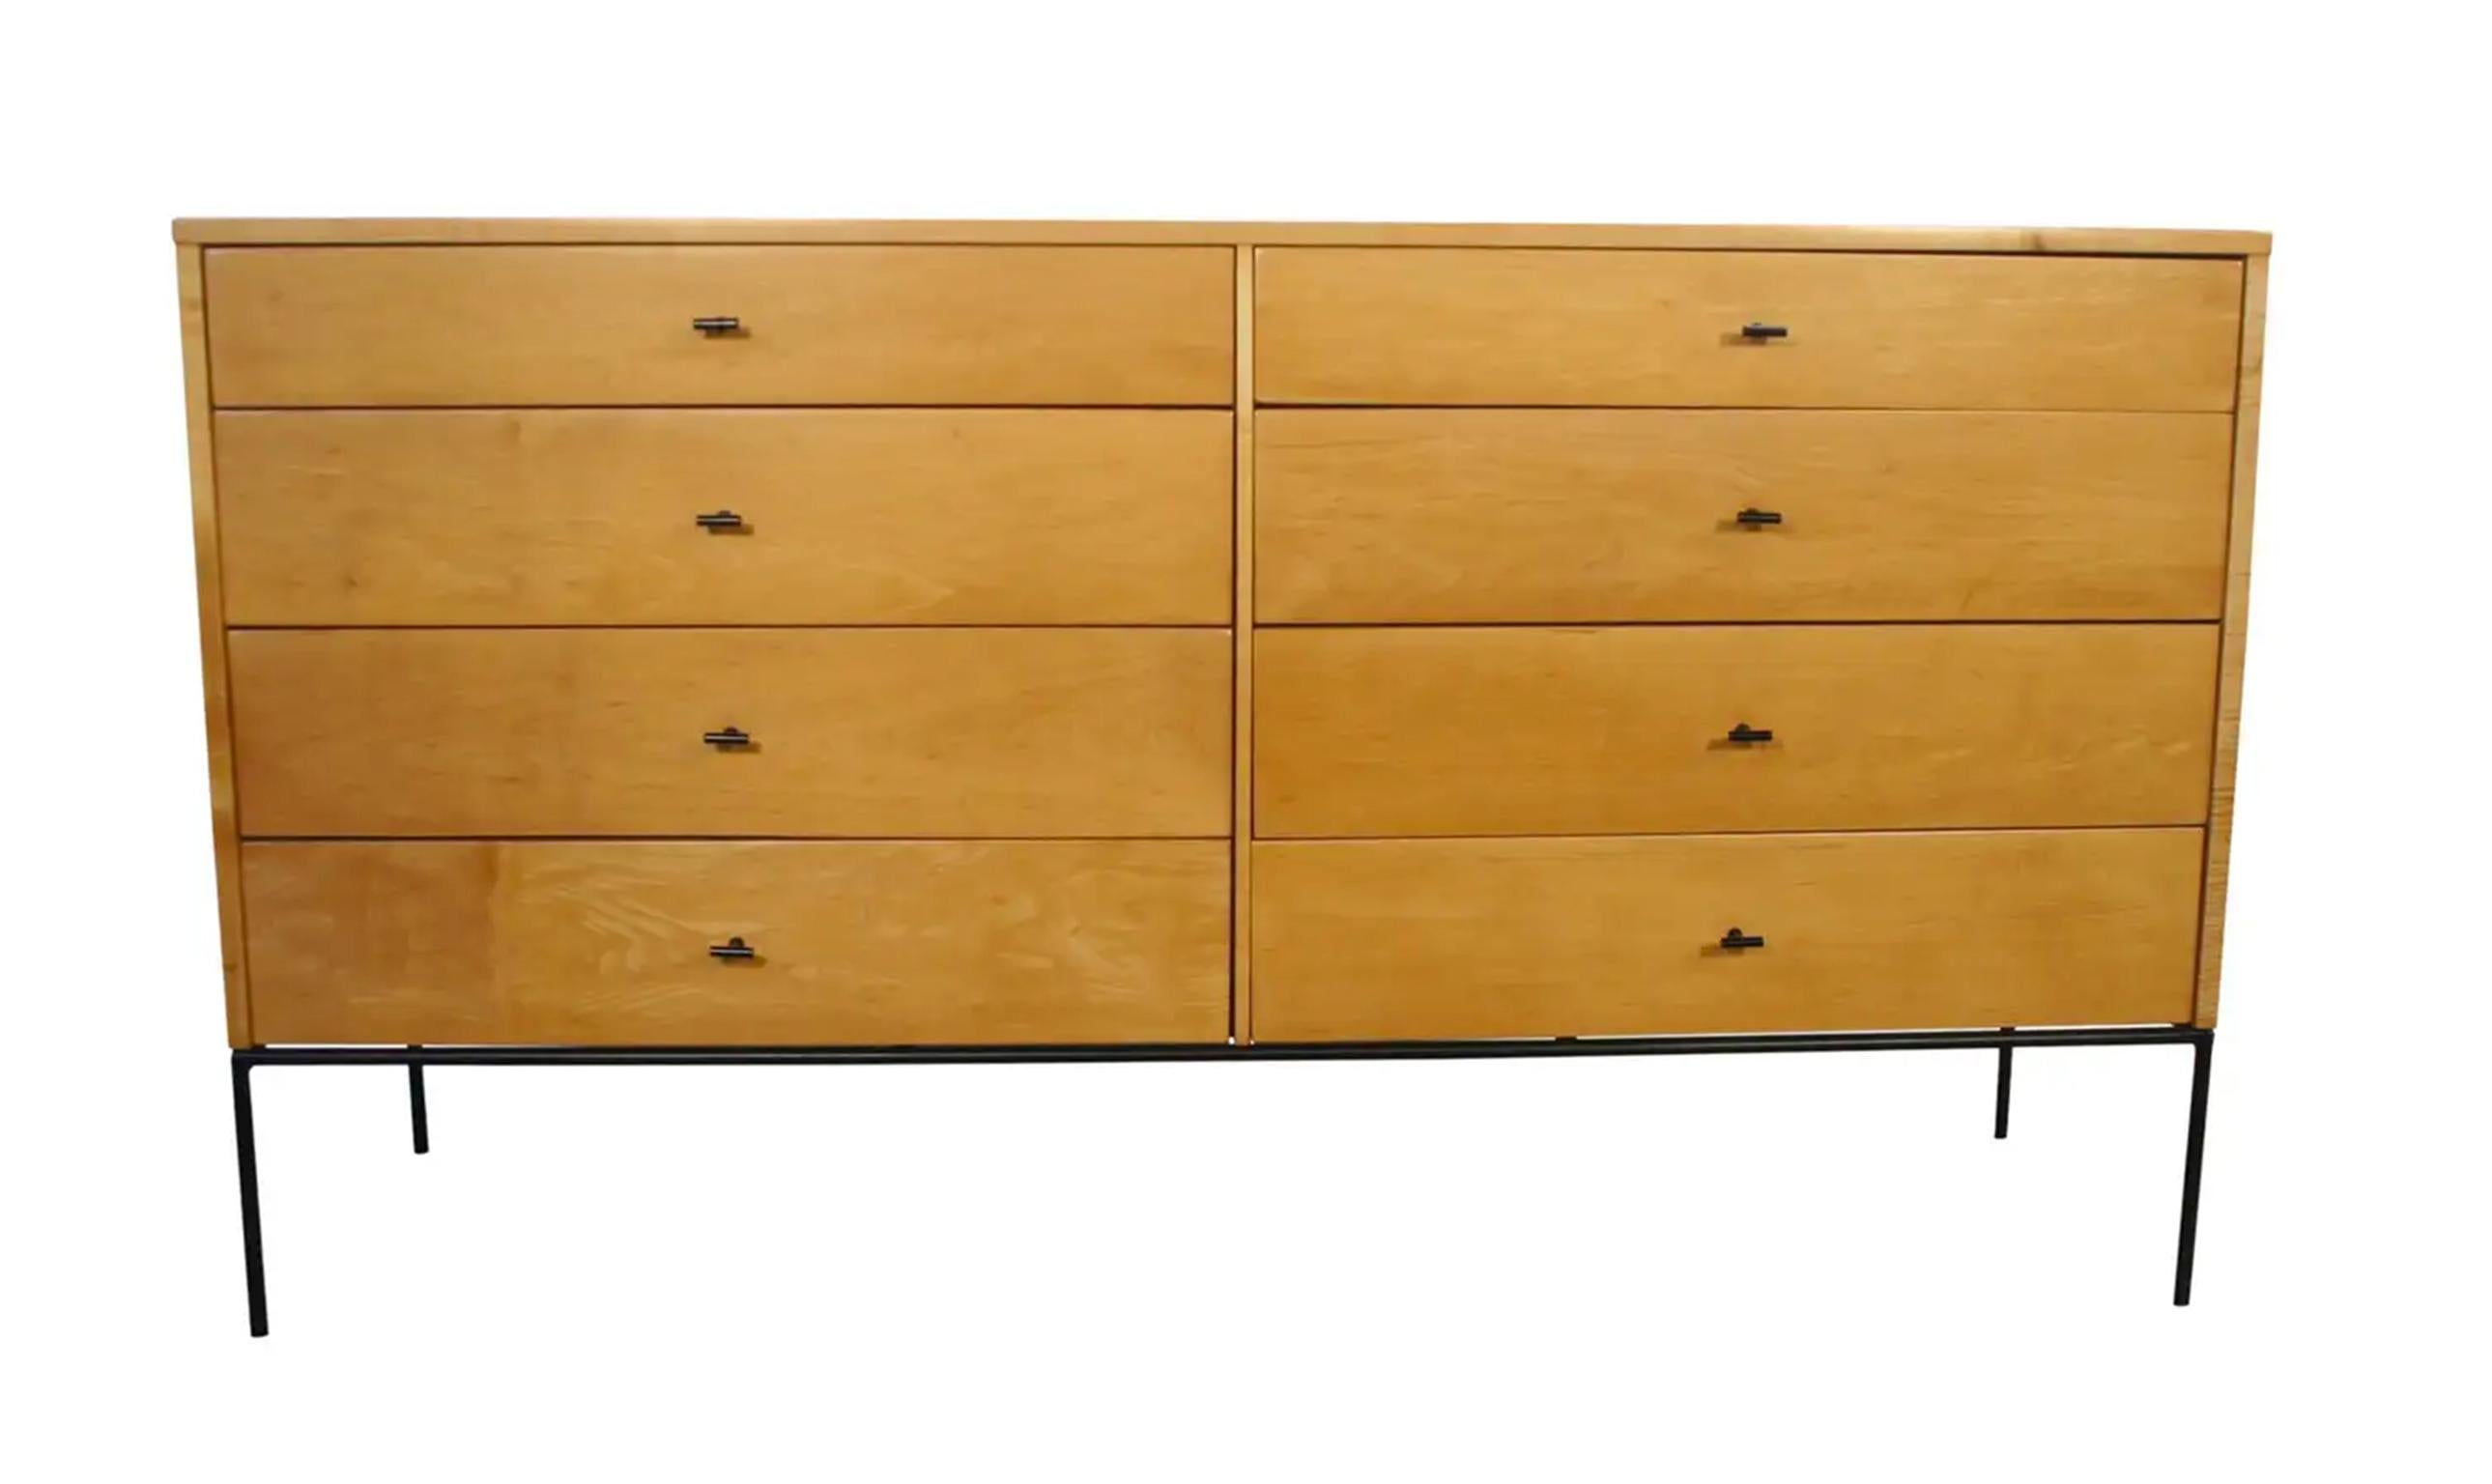 This listing is for a Grouping of 4 Paul Mccobb items . 
(1) 1507 8 Drawer Dresser
(2) 1503 2 Drawer Nightstands
(1) 4 Drawer 8 Knob Jewelry box has felt inserts

All items are Refinished Vintage items - In raw blonde maple with clear coat all items